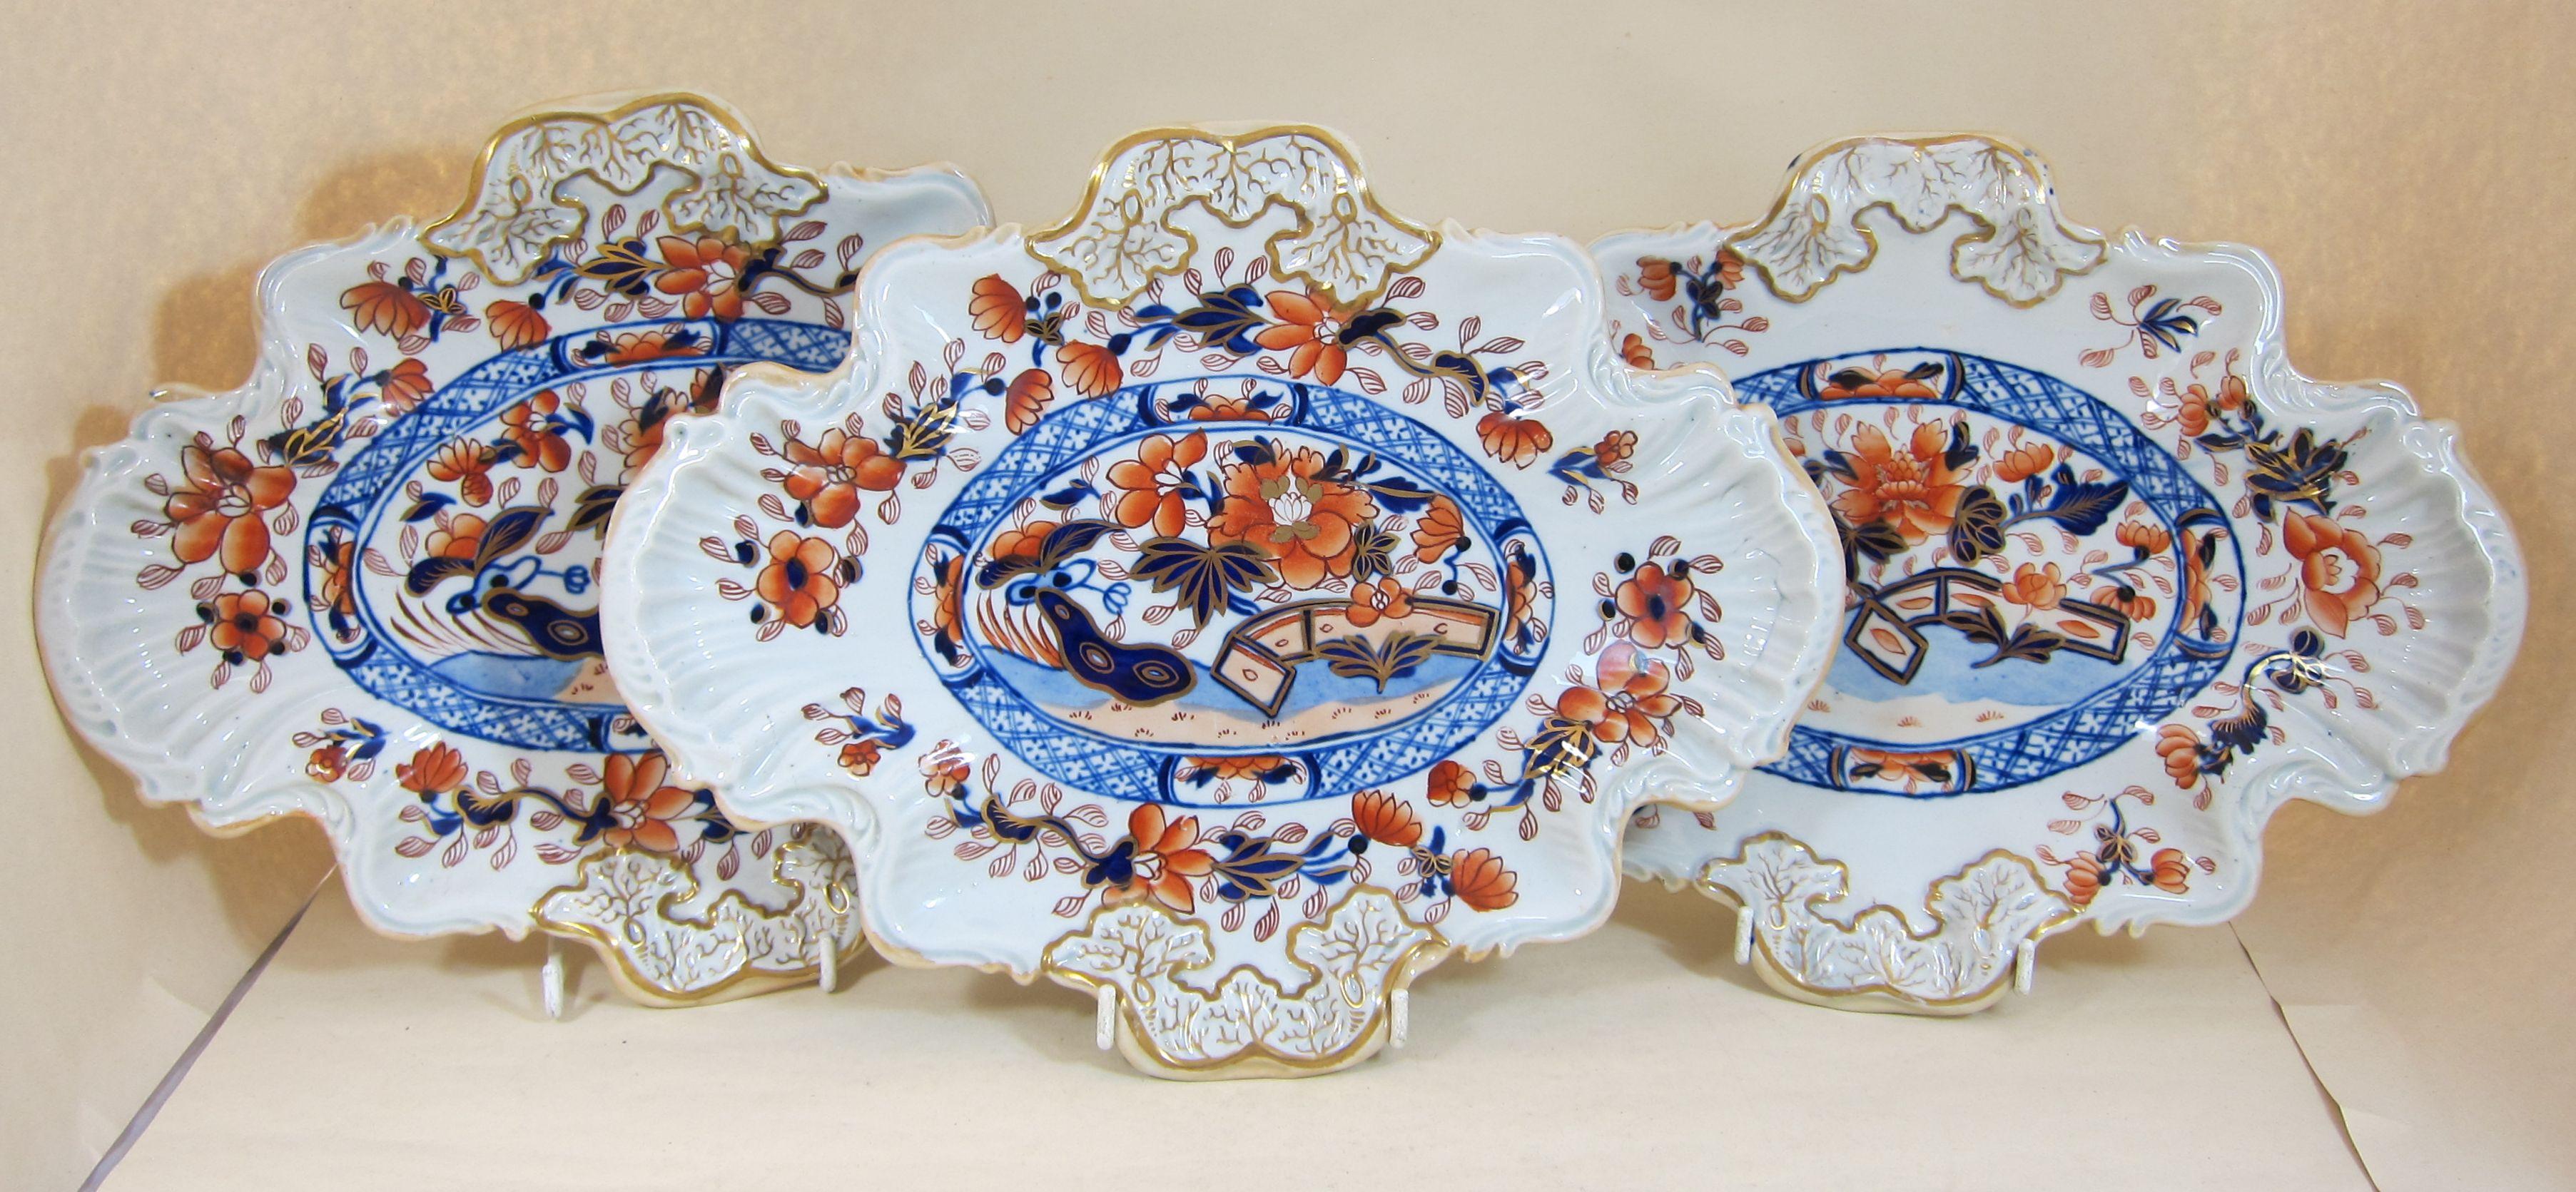 Japonisme Three Masons Ironstone Floral and Fence Decorated Dishes